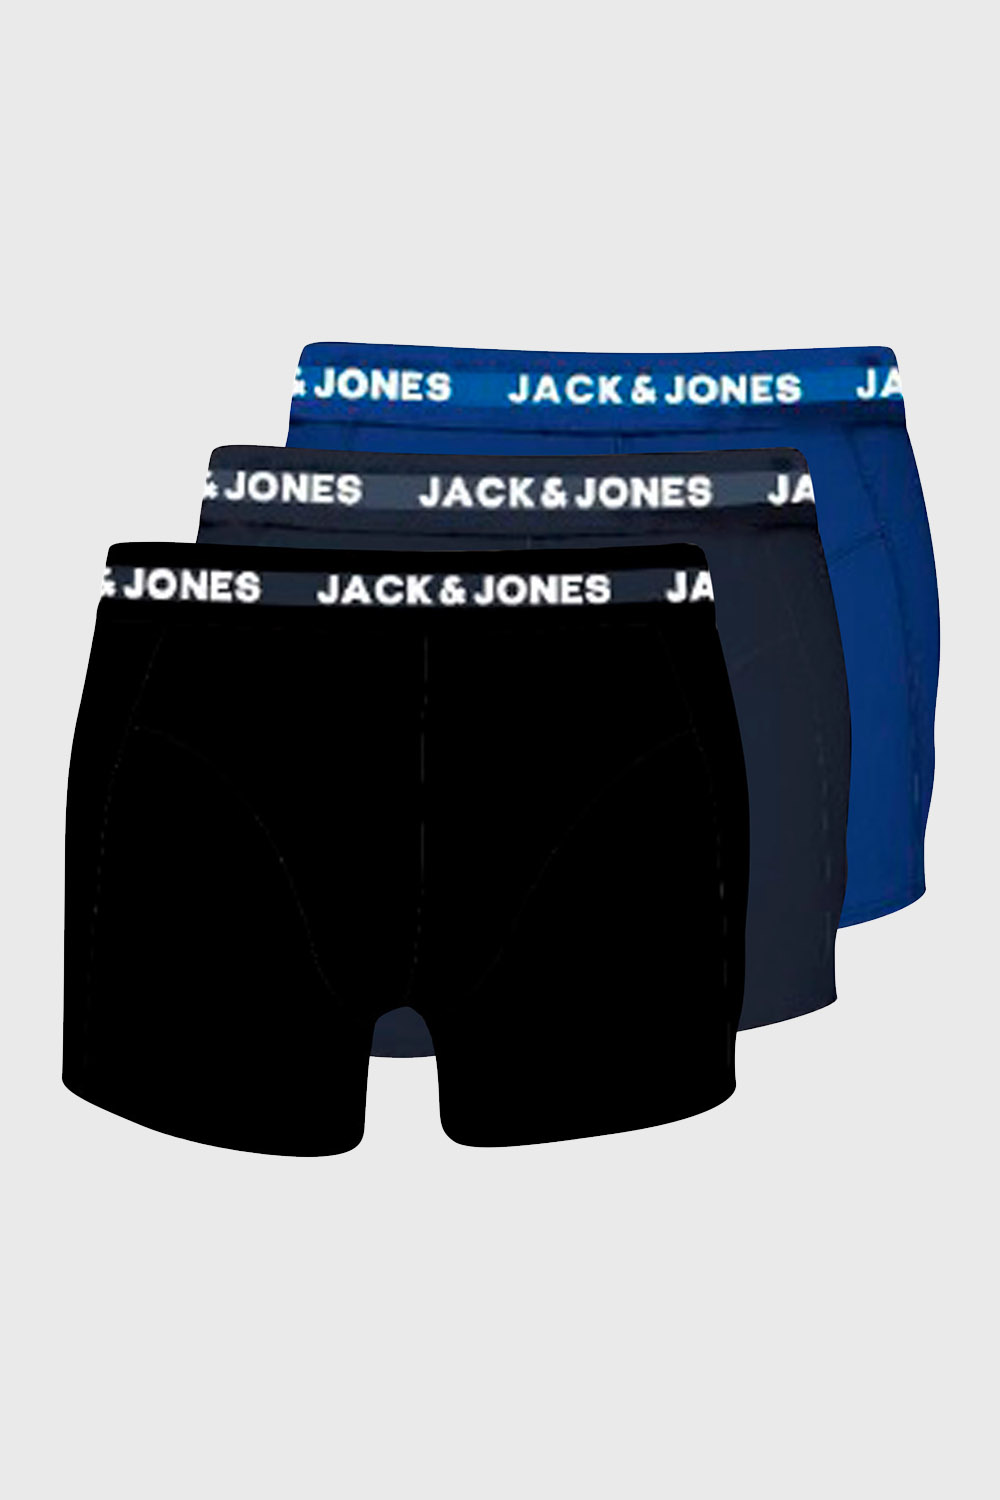 8 x Size Large  JACK & JONES 3 pack Designer logo boxer shorts in Black, Navy and Blue RRP £22.00 each   Ref A90/A89